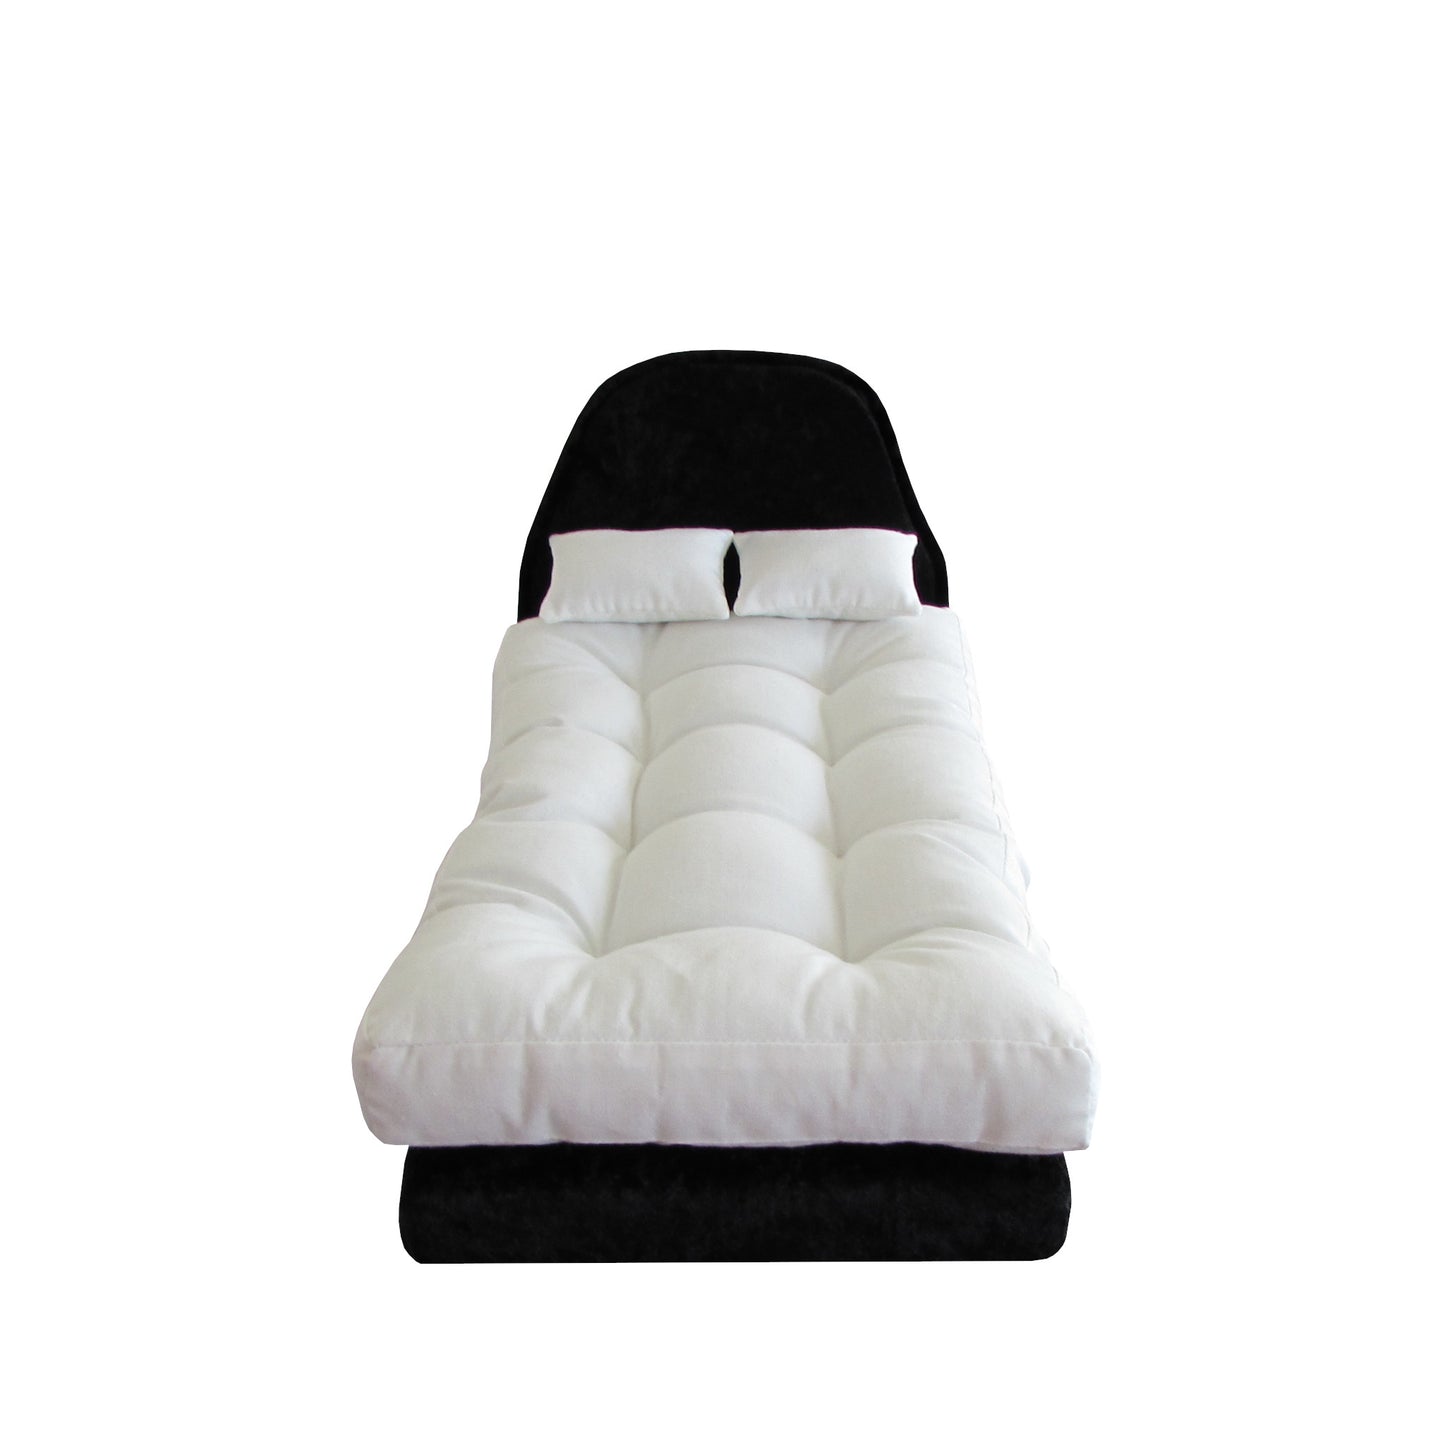 Black Crushed Velvet Double Doll Bed, Pillows, and Mattress for 11.5-inch and 12-inch dolls Second view